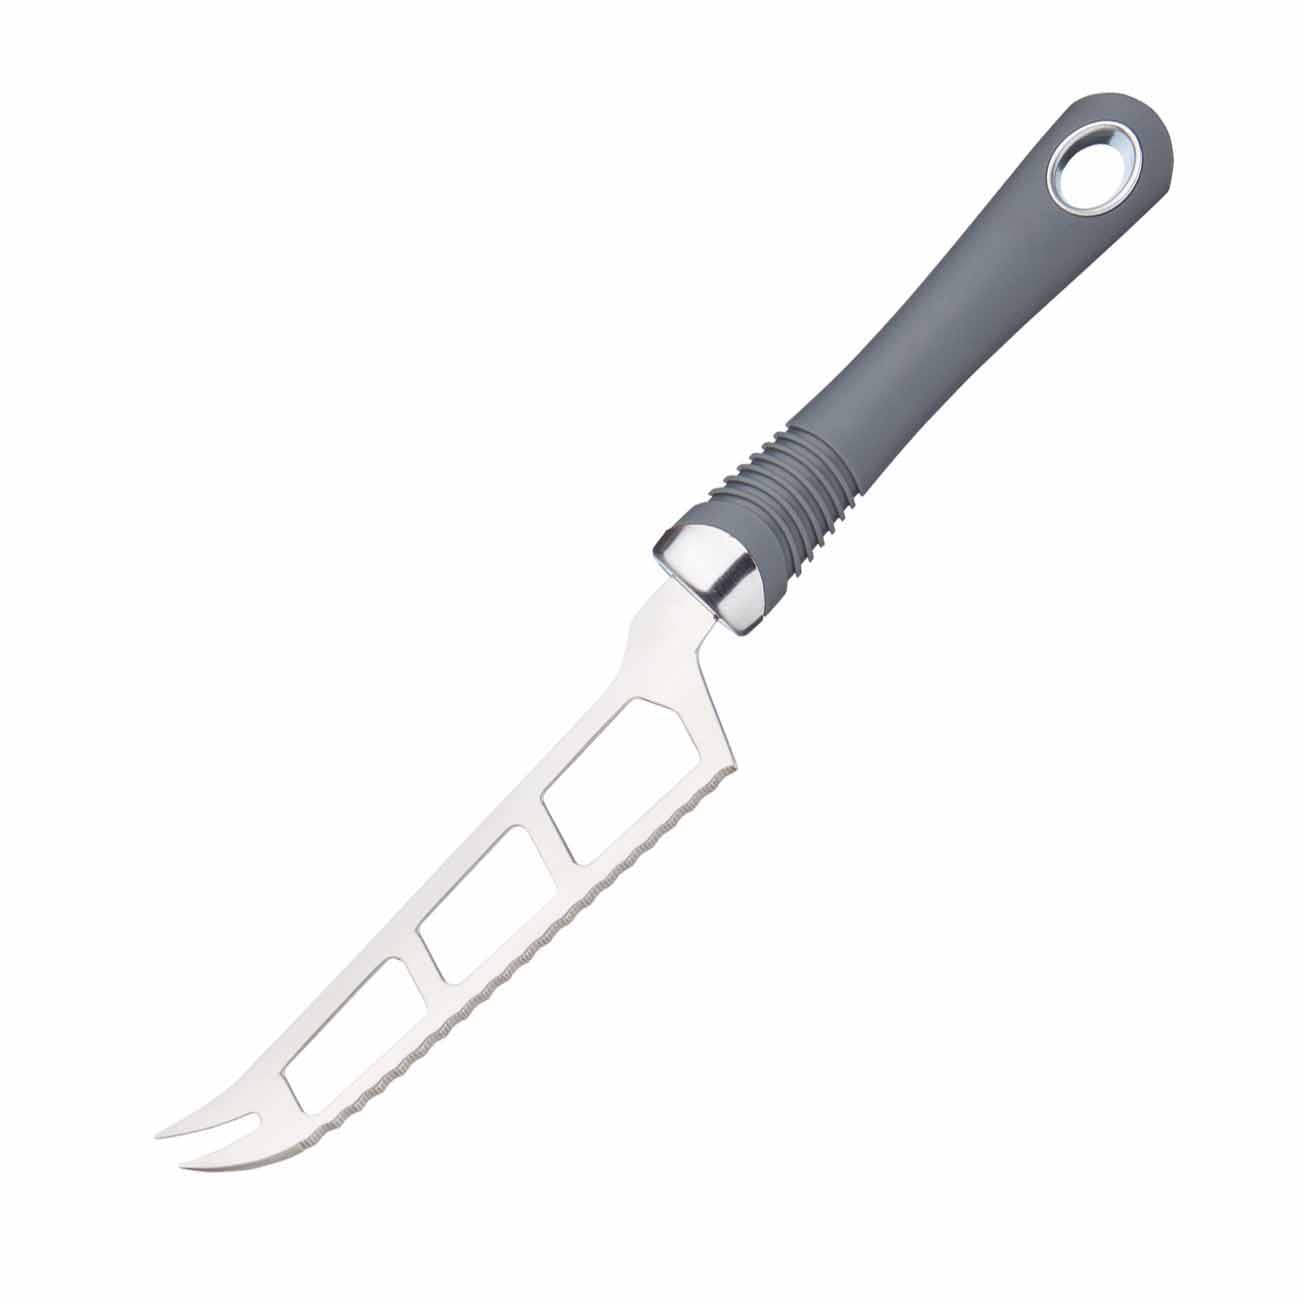 KitchenCraft Professional Cheese Knife with Soft-Grip Handle - The Cooks Cupboard Ltd